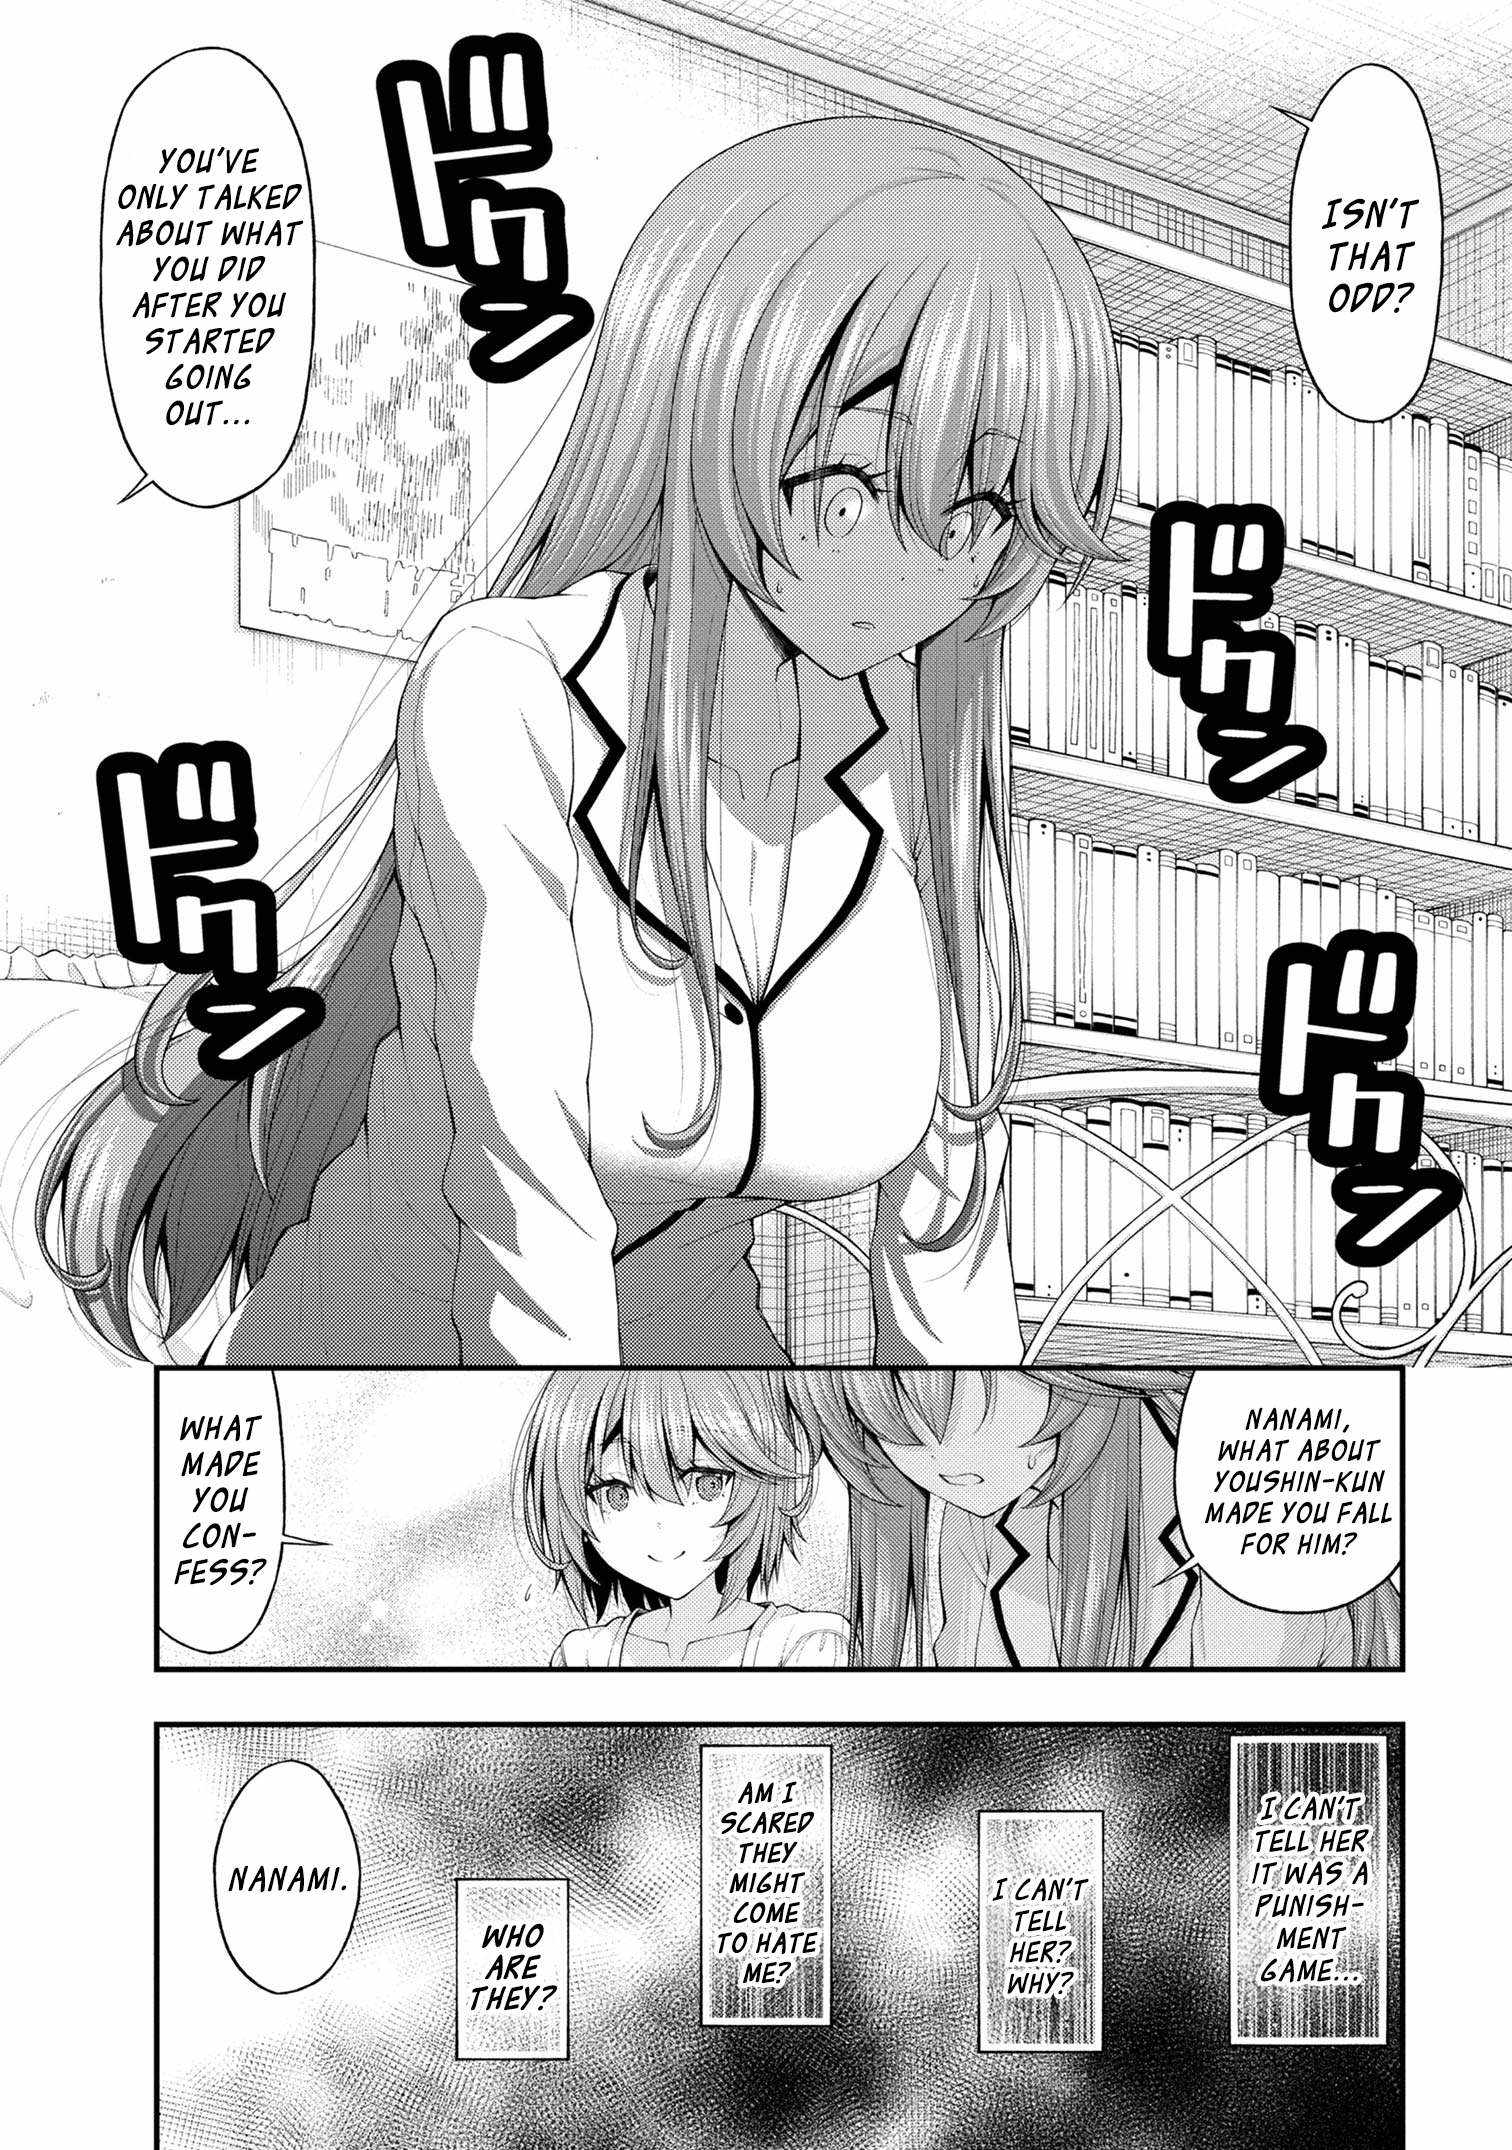 The Gal Who Was Meant to Confess to Me as a Game Punishment Has Apparently Fallen in Love with Me Chapter 12-5-eng-li - Page 14